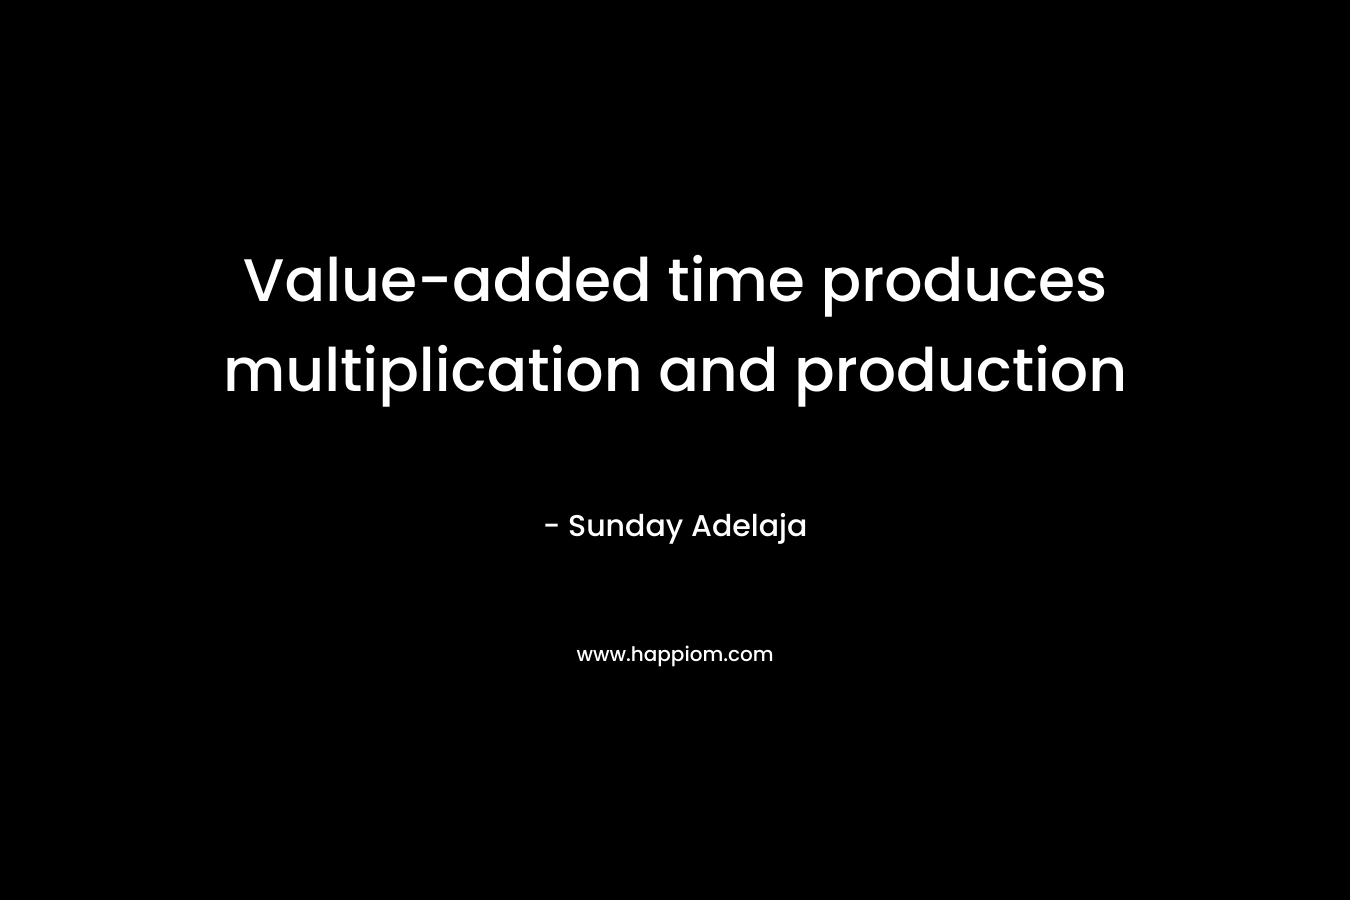 Value-added time produces multiplication and production